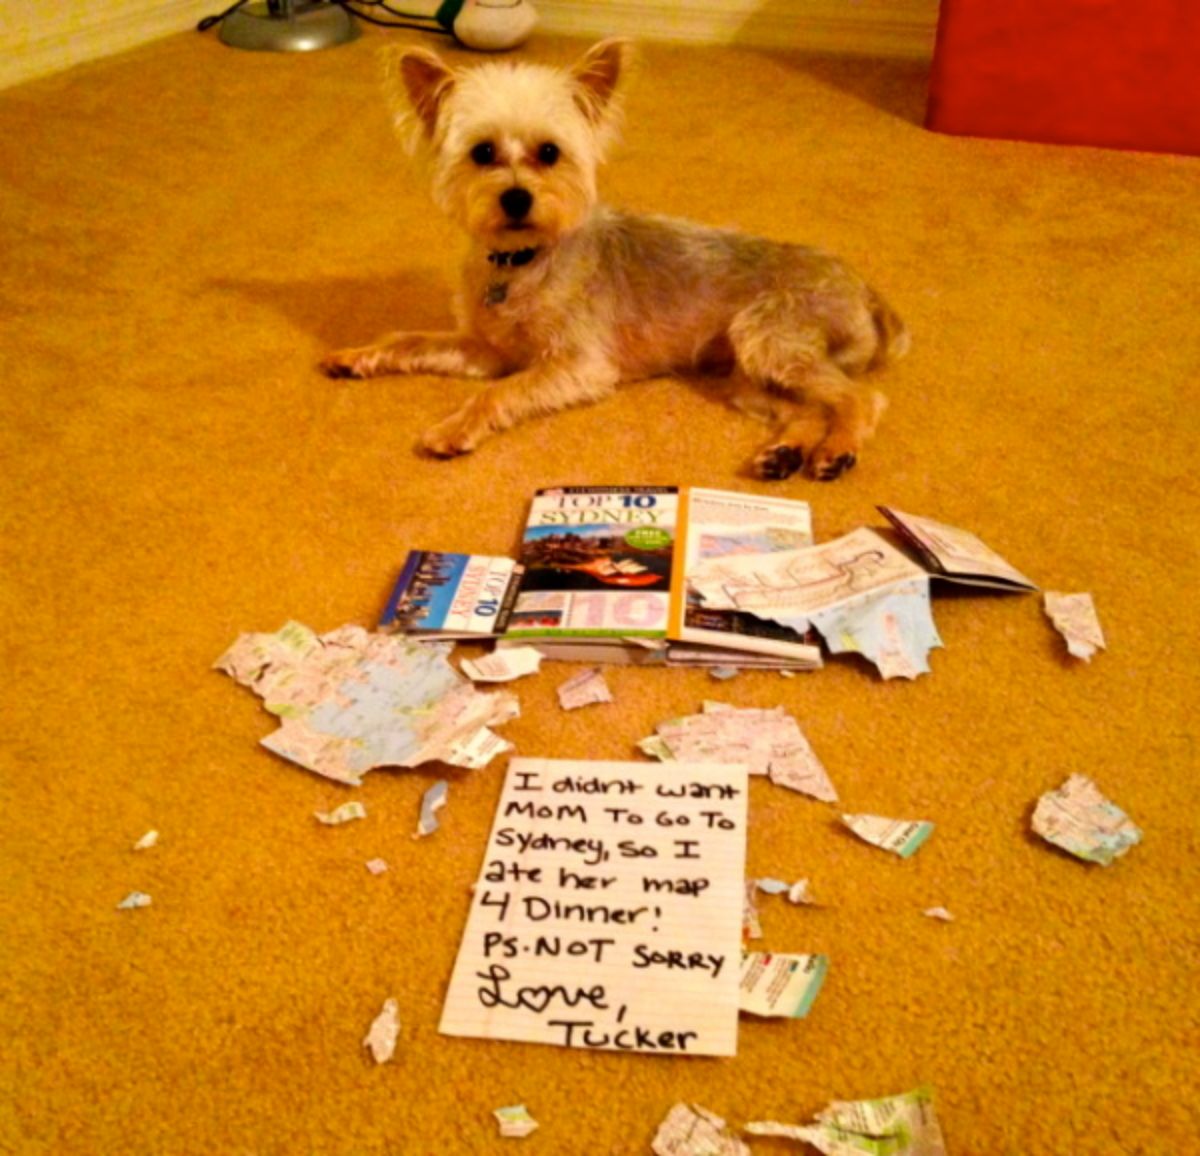 brown dog laying next to a ripped up map book with a sign saying he ruined his mother's map book of Sydney